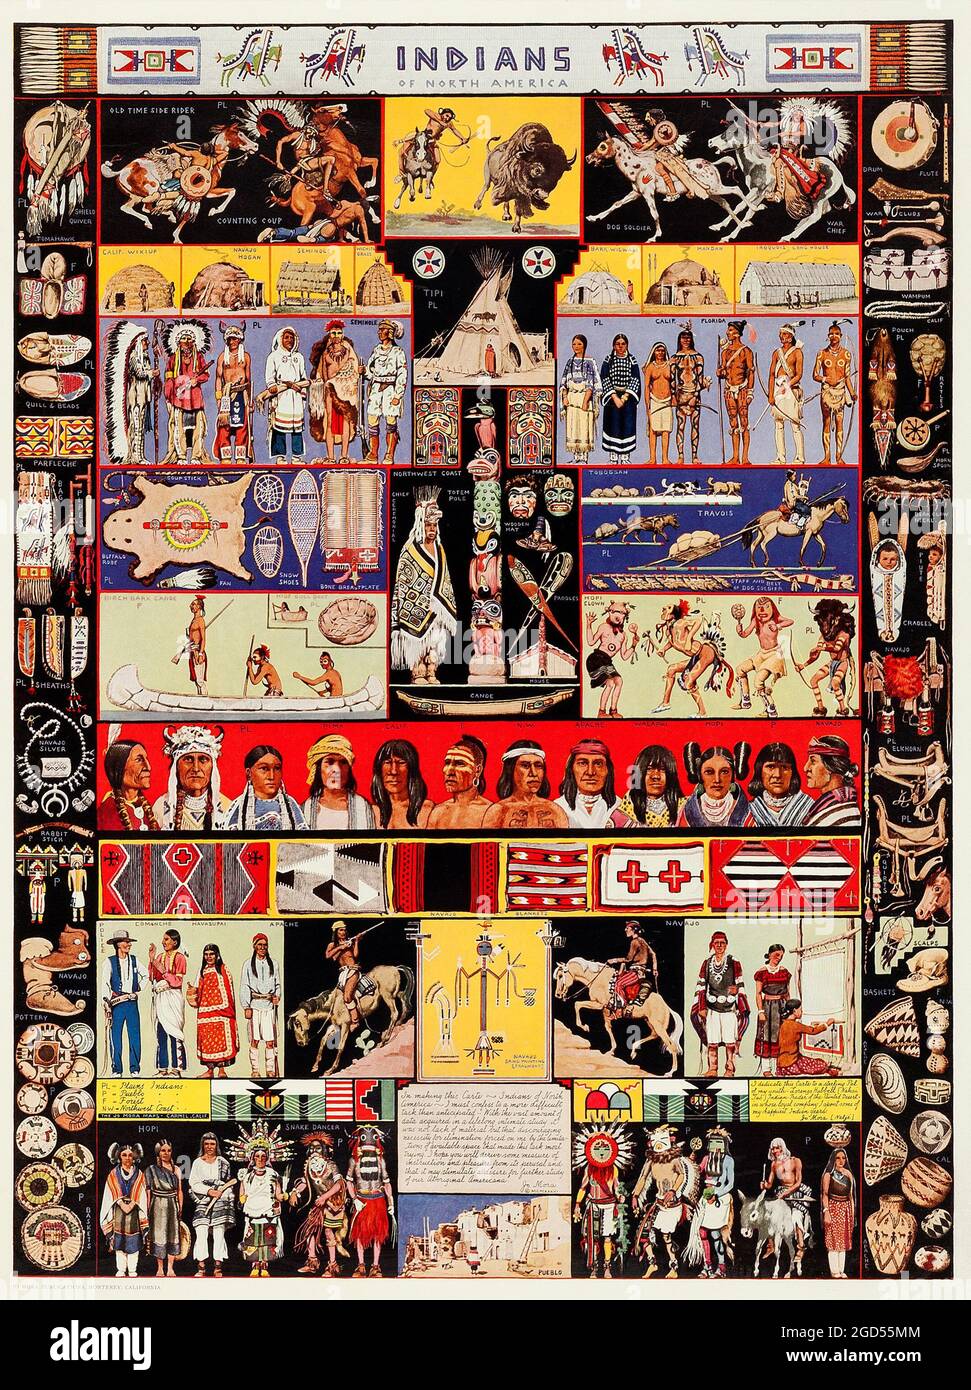 Indians of North America (Jo Mora Publications, 1936). Pictorial Map Poster. Artwork by Jo Mora. Pictorial map feat. native americans. Stock Photo